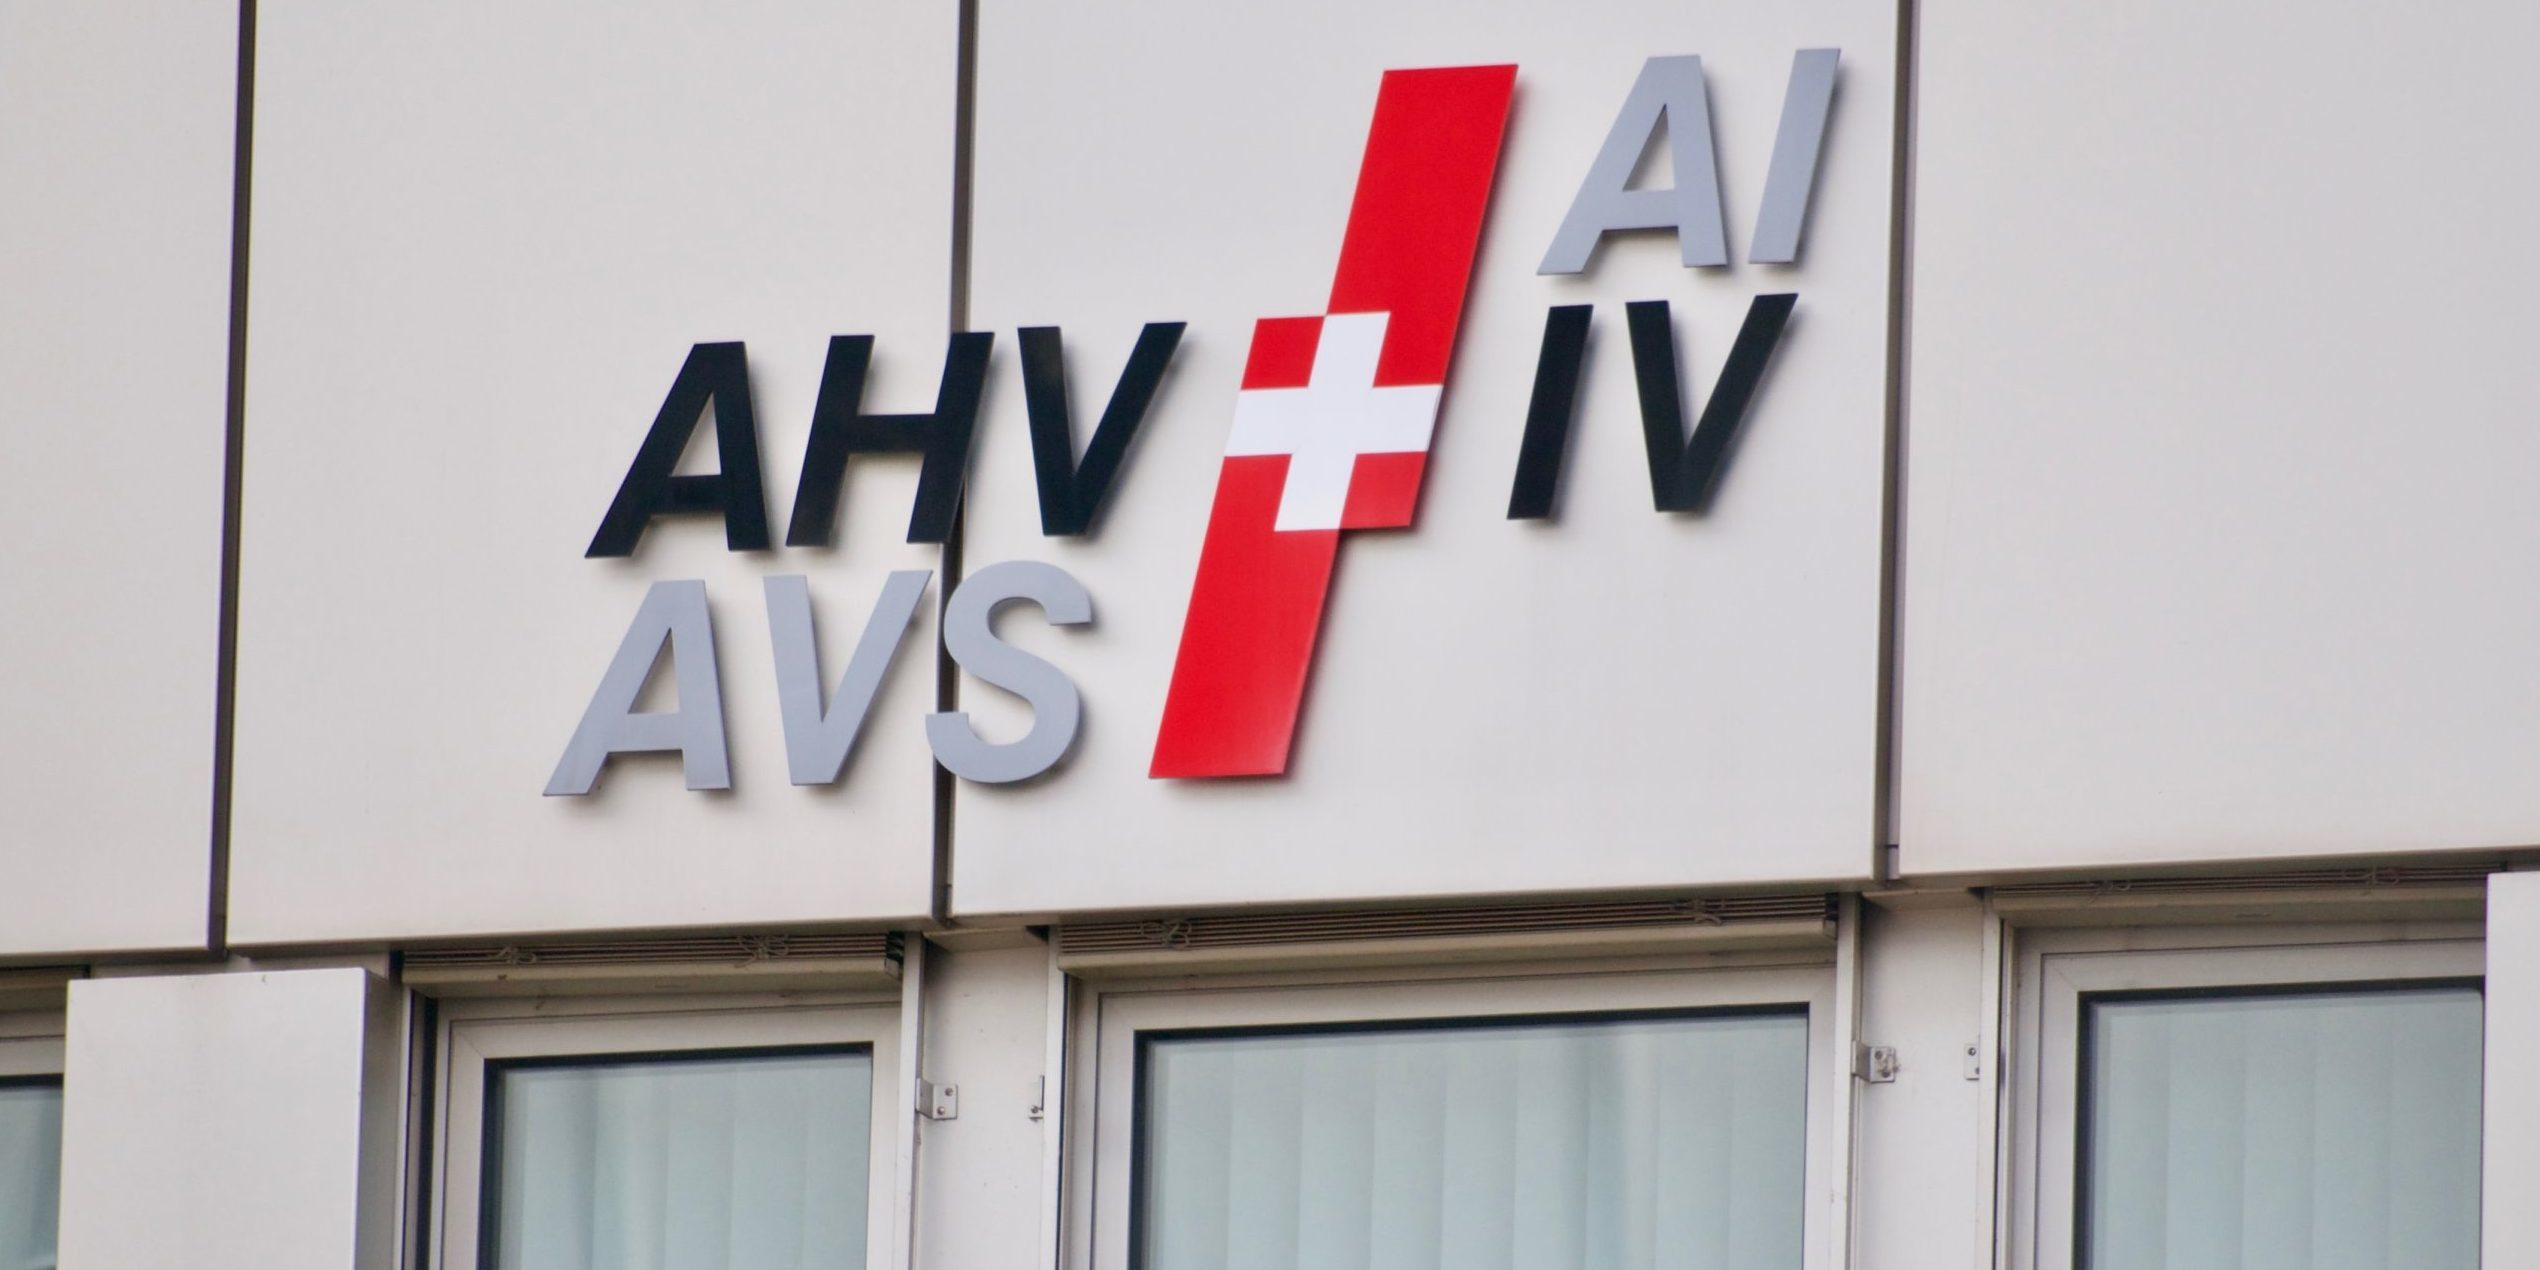 AHV AVS AI IV Swiss pension and invalidity sign